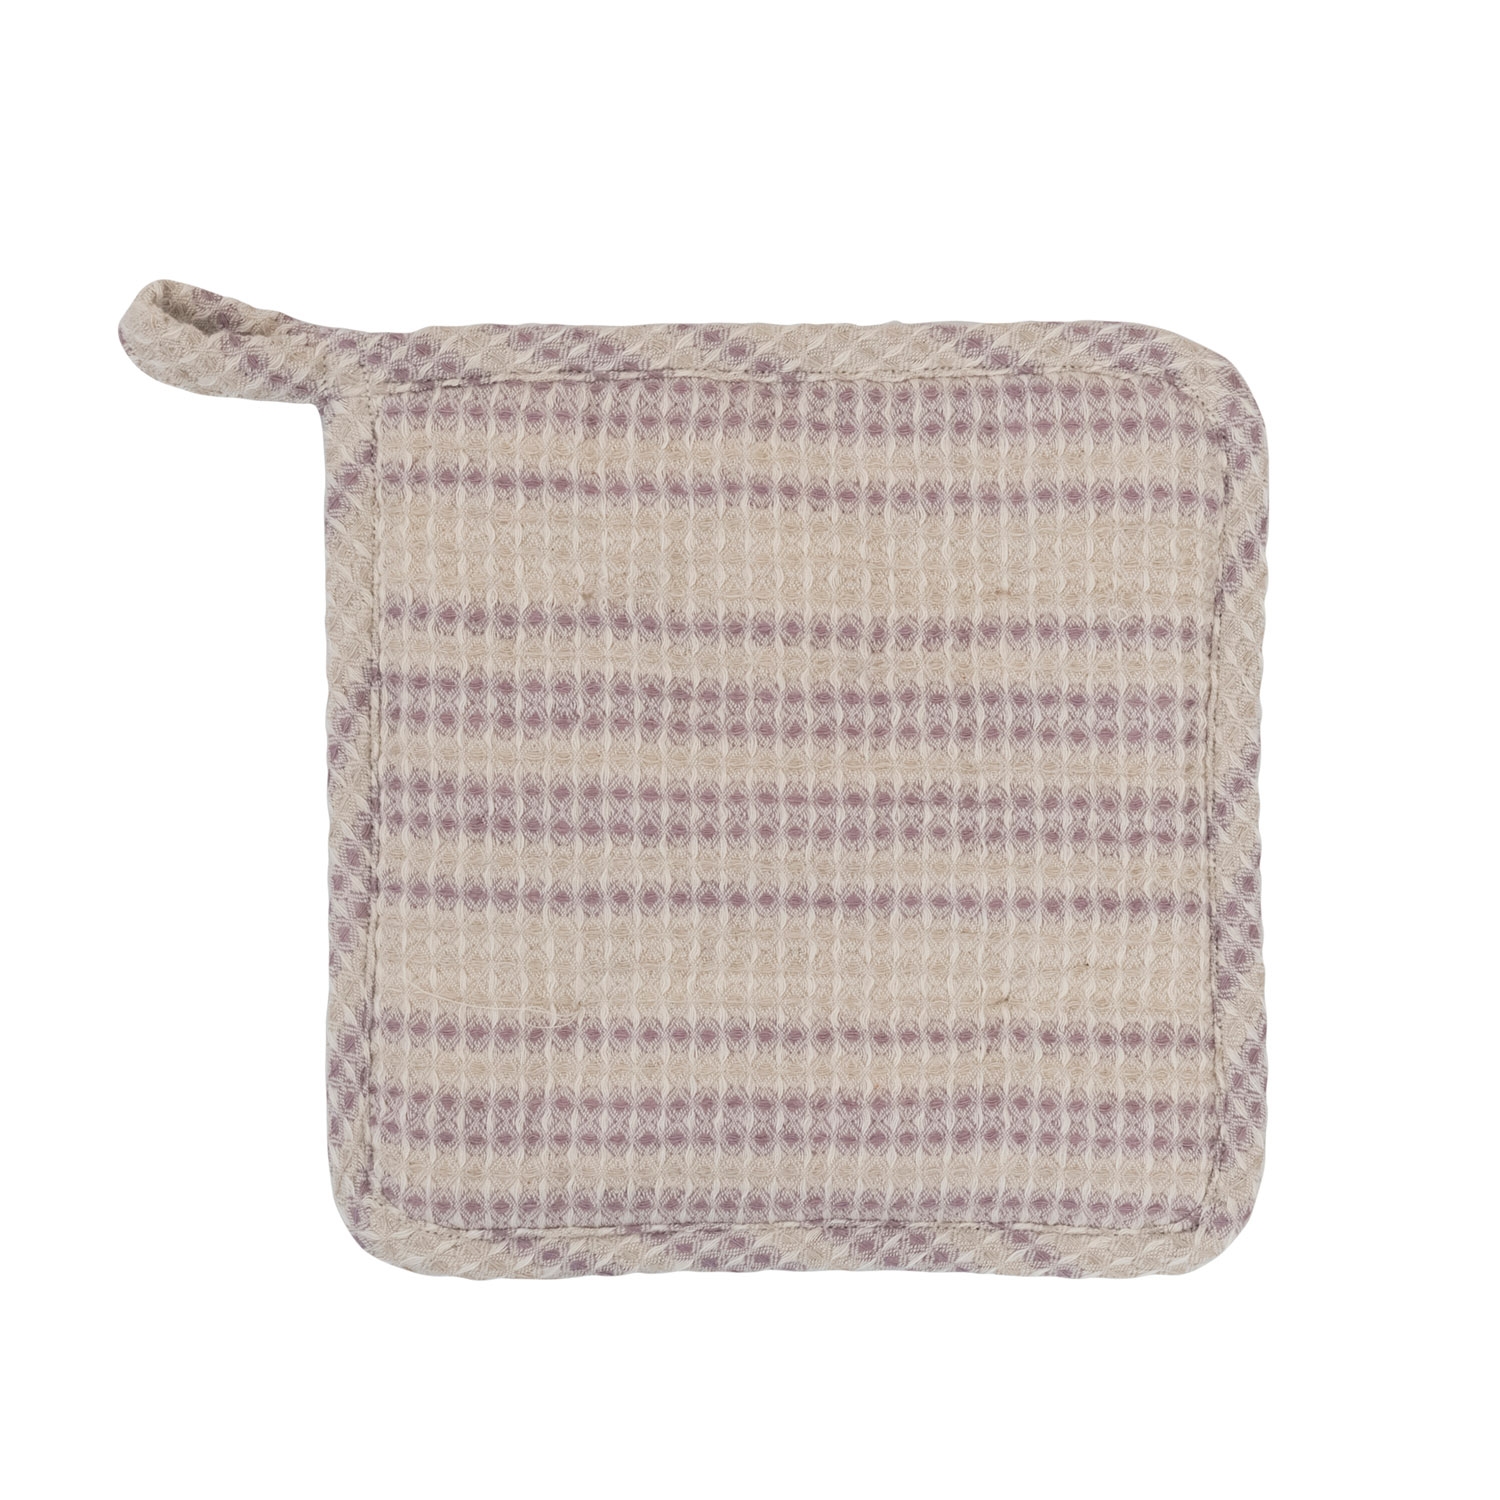 Square Cotton waffle weave Potholder, Natural and Lilac Color - Image 0